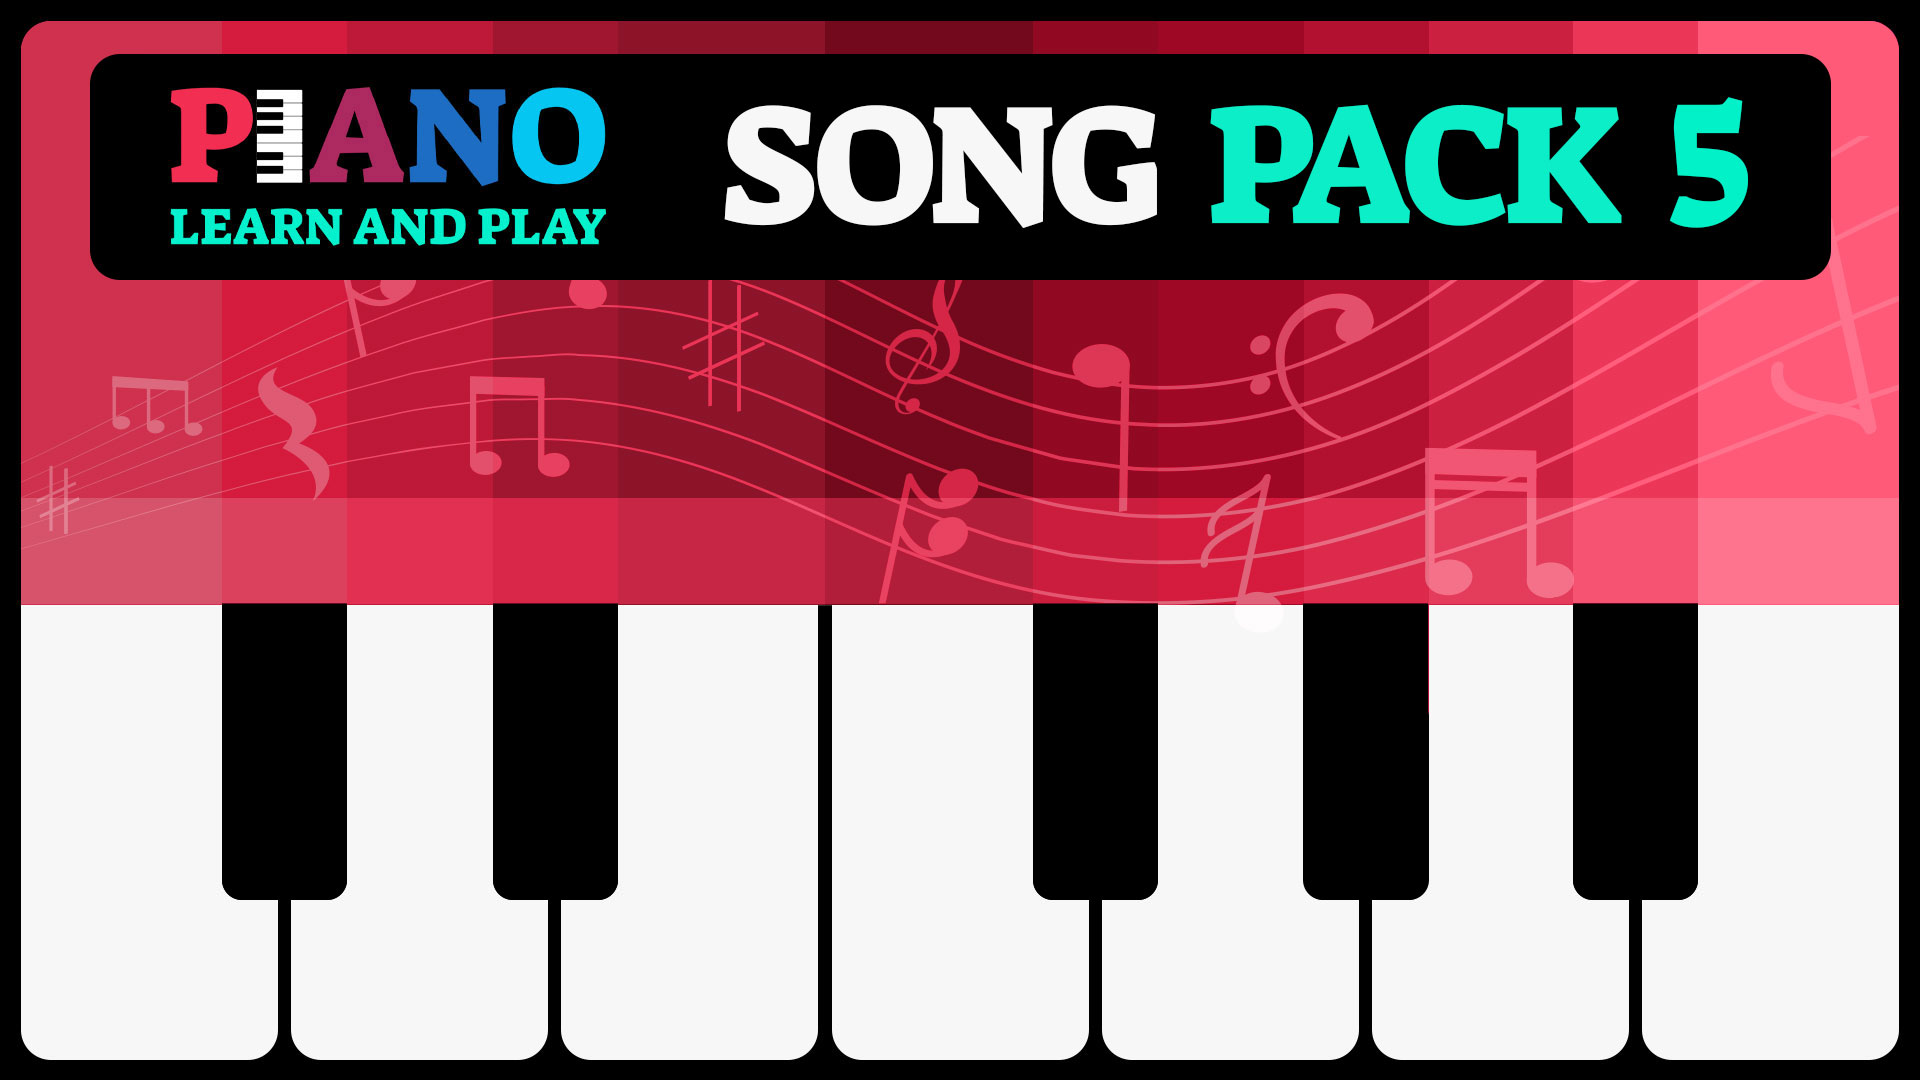 Song Pack 5